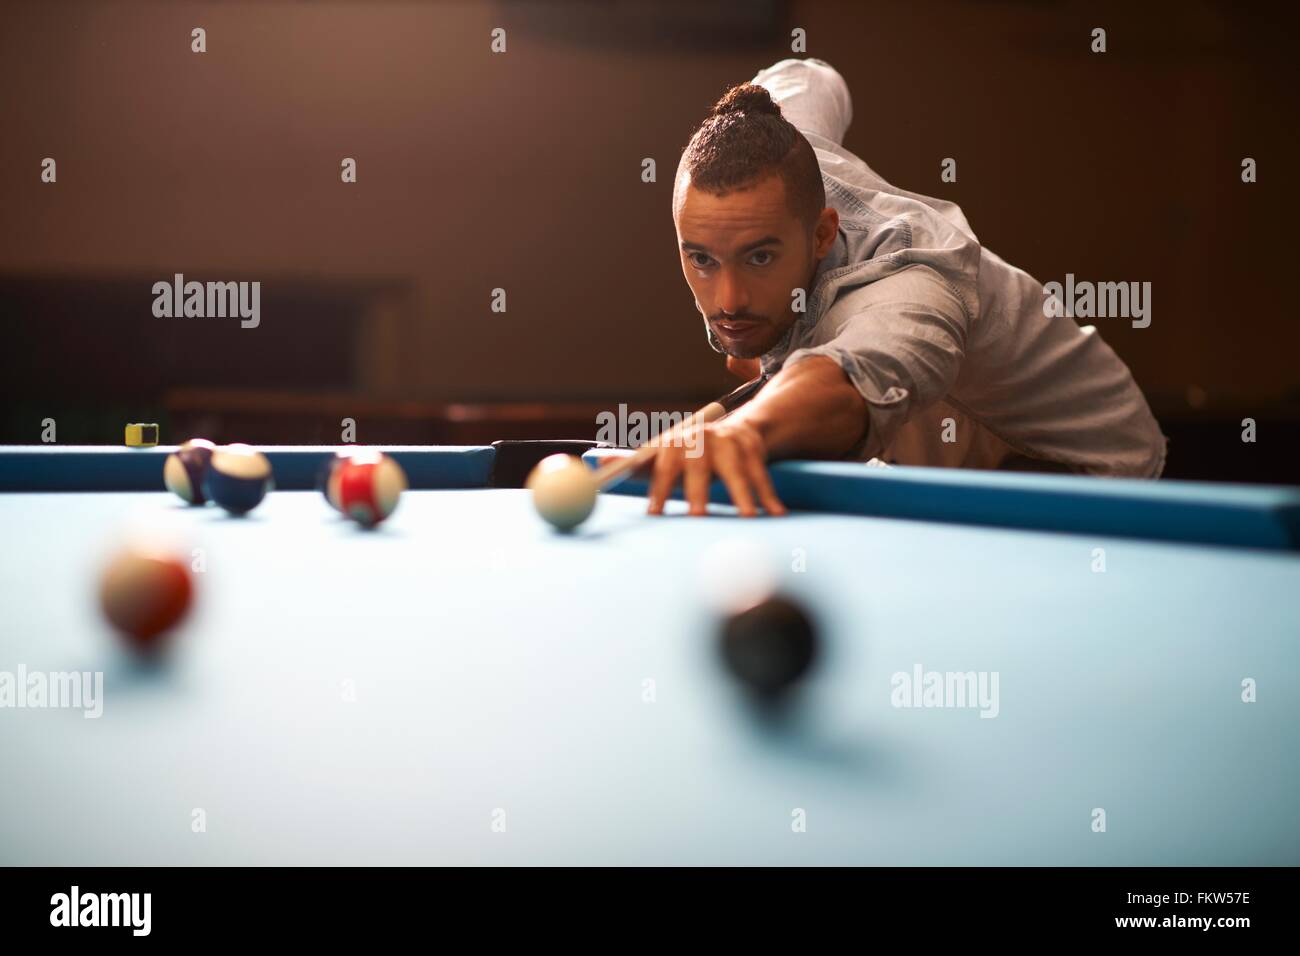 Man playing pool Banque D'Images